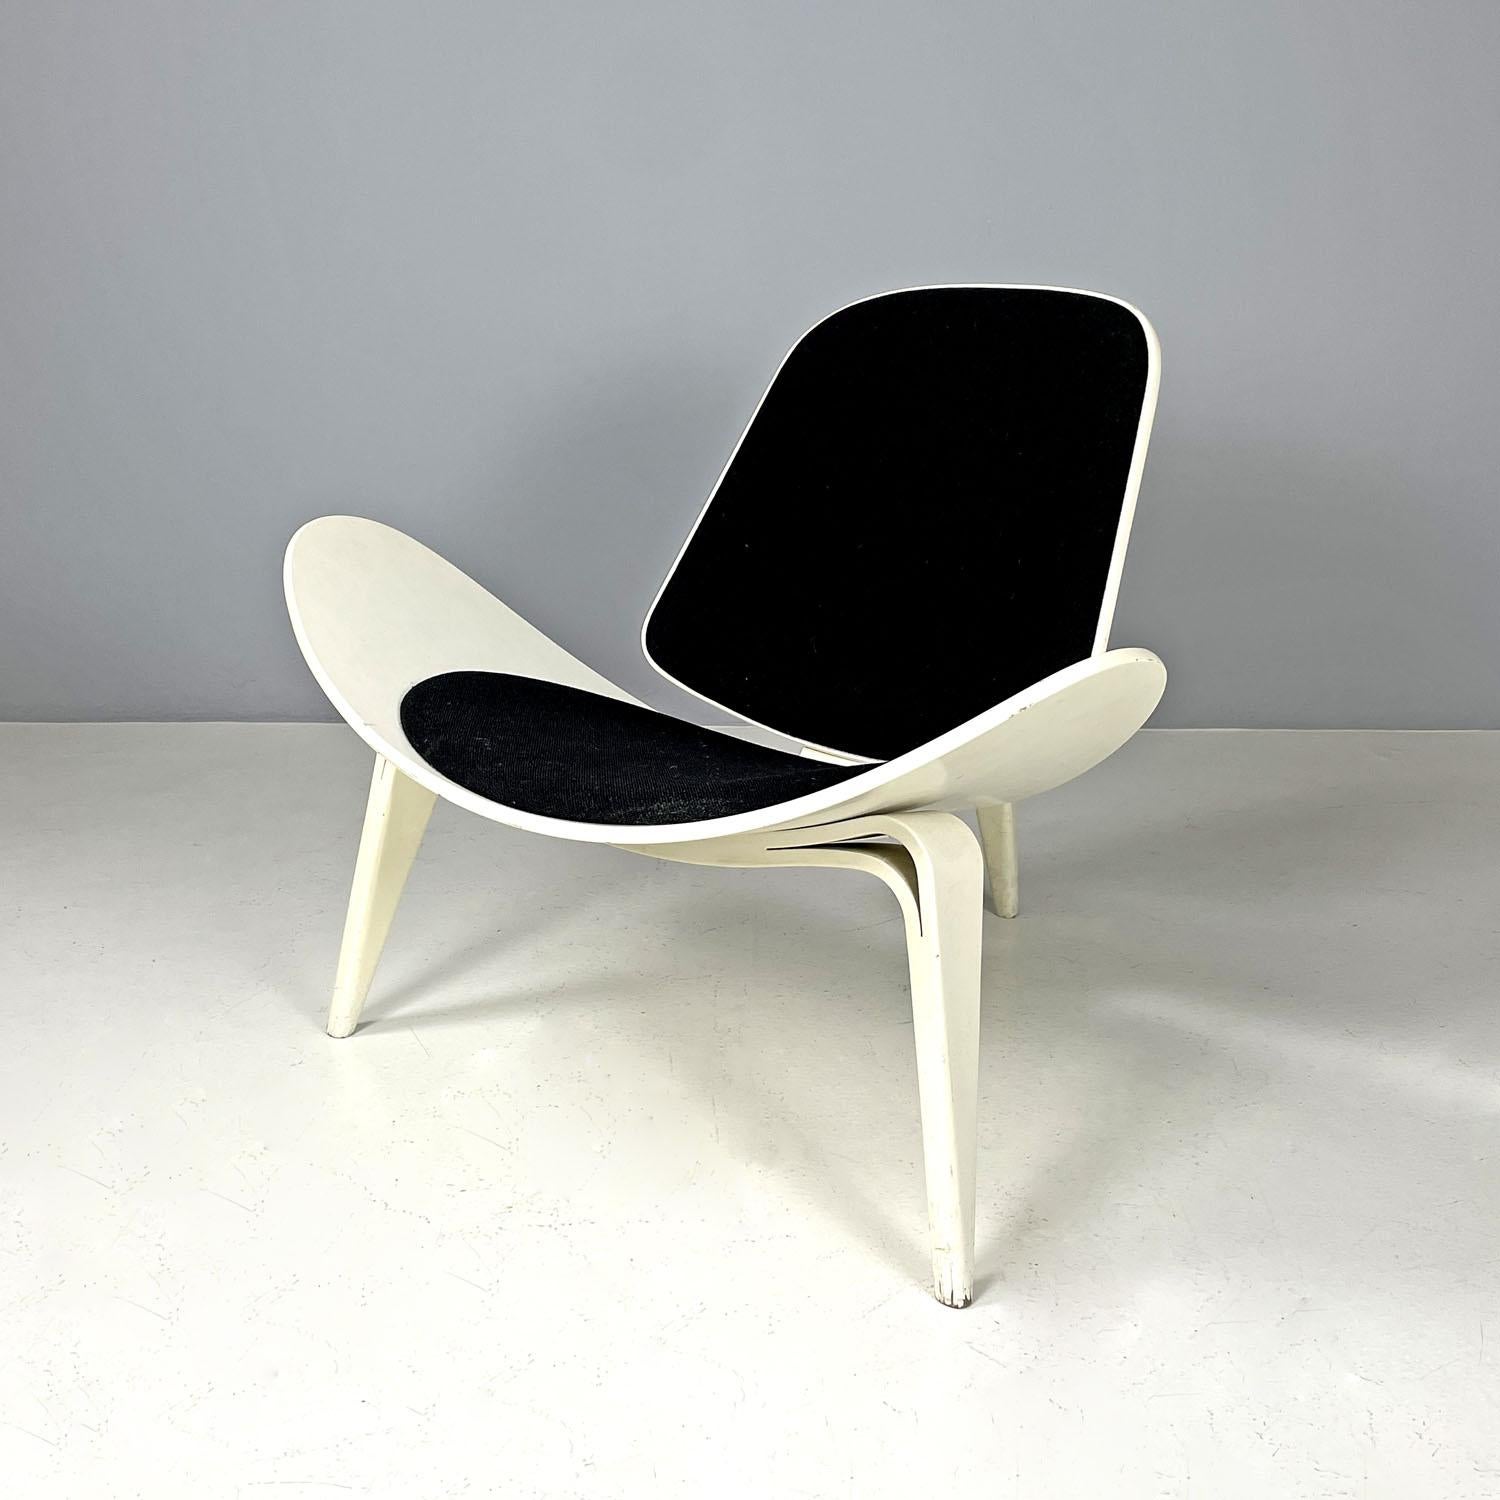 Danish wooden shell armchair CH07 by Hans Wegner for Carl Hansen & Søn, 2000s
Shell armchair mod. CH07 Shell Chair with white lacquered wooden structure. The structure has particular dynamic and enveloping lines, the seat is elongated and the sides